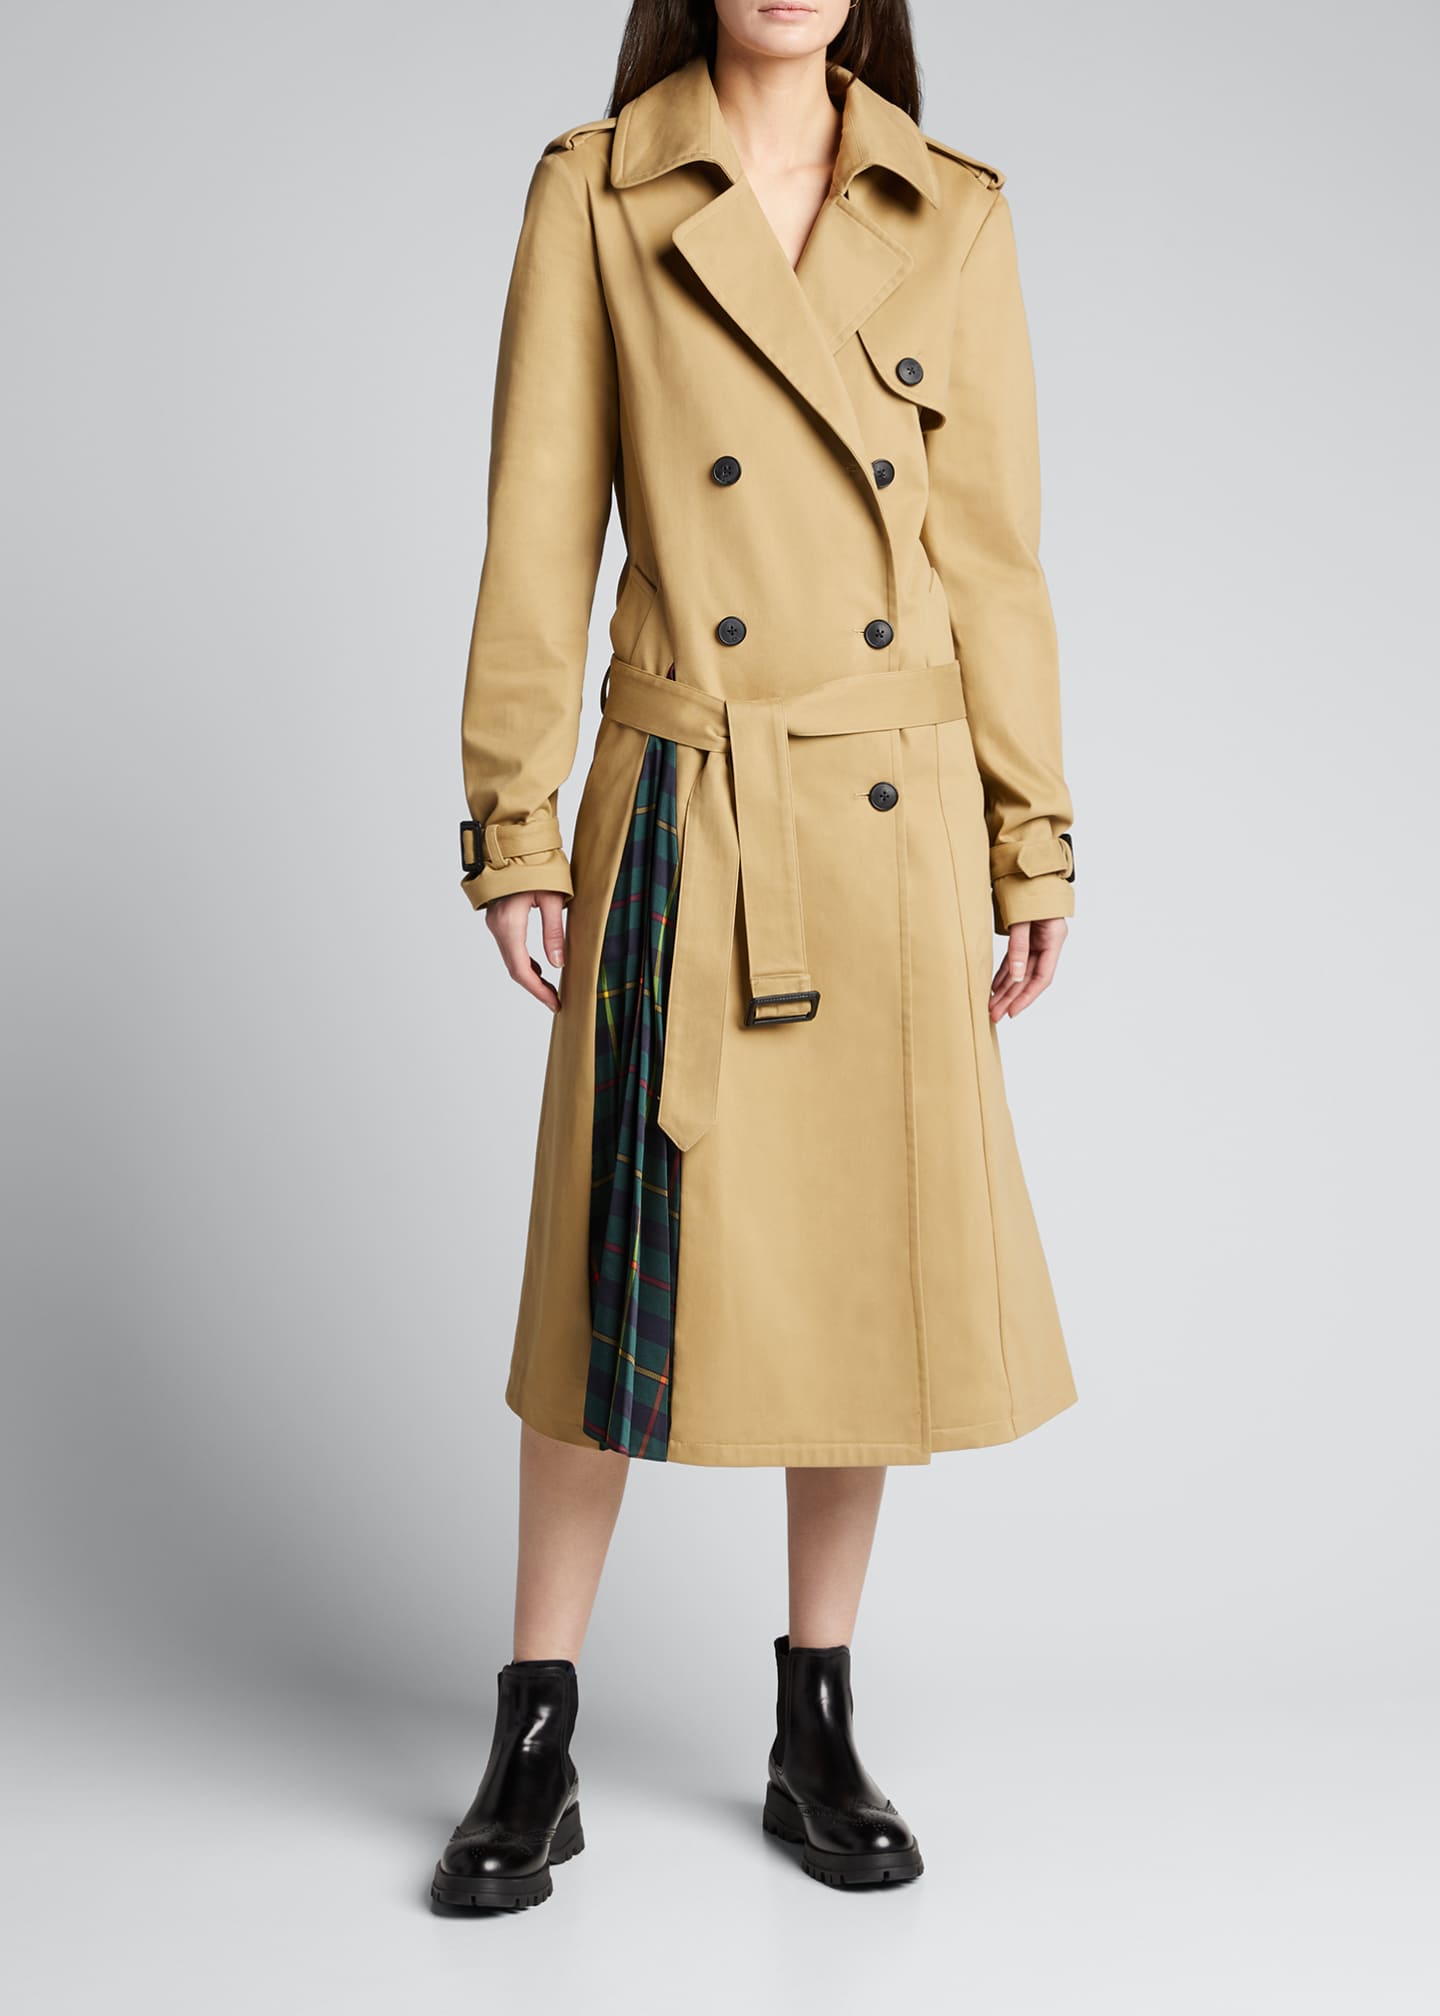 Monse Trench Coat with Pleated Plaid Back - Bergdorf Goodman